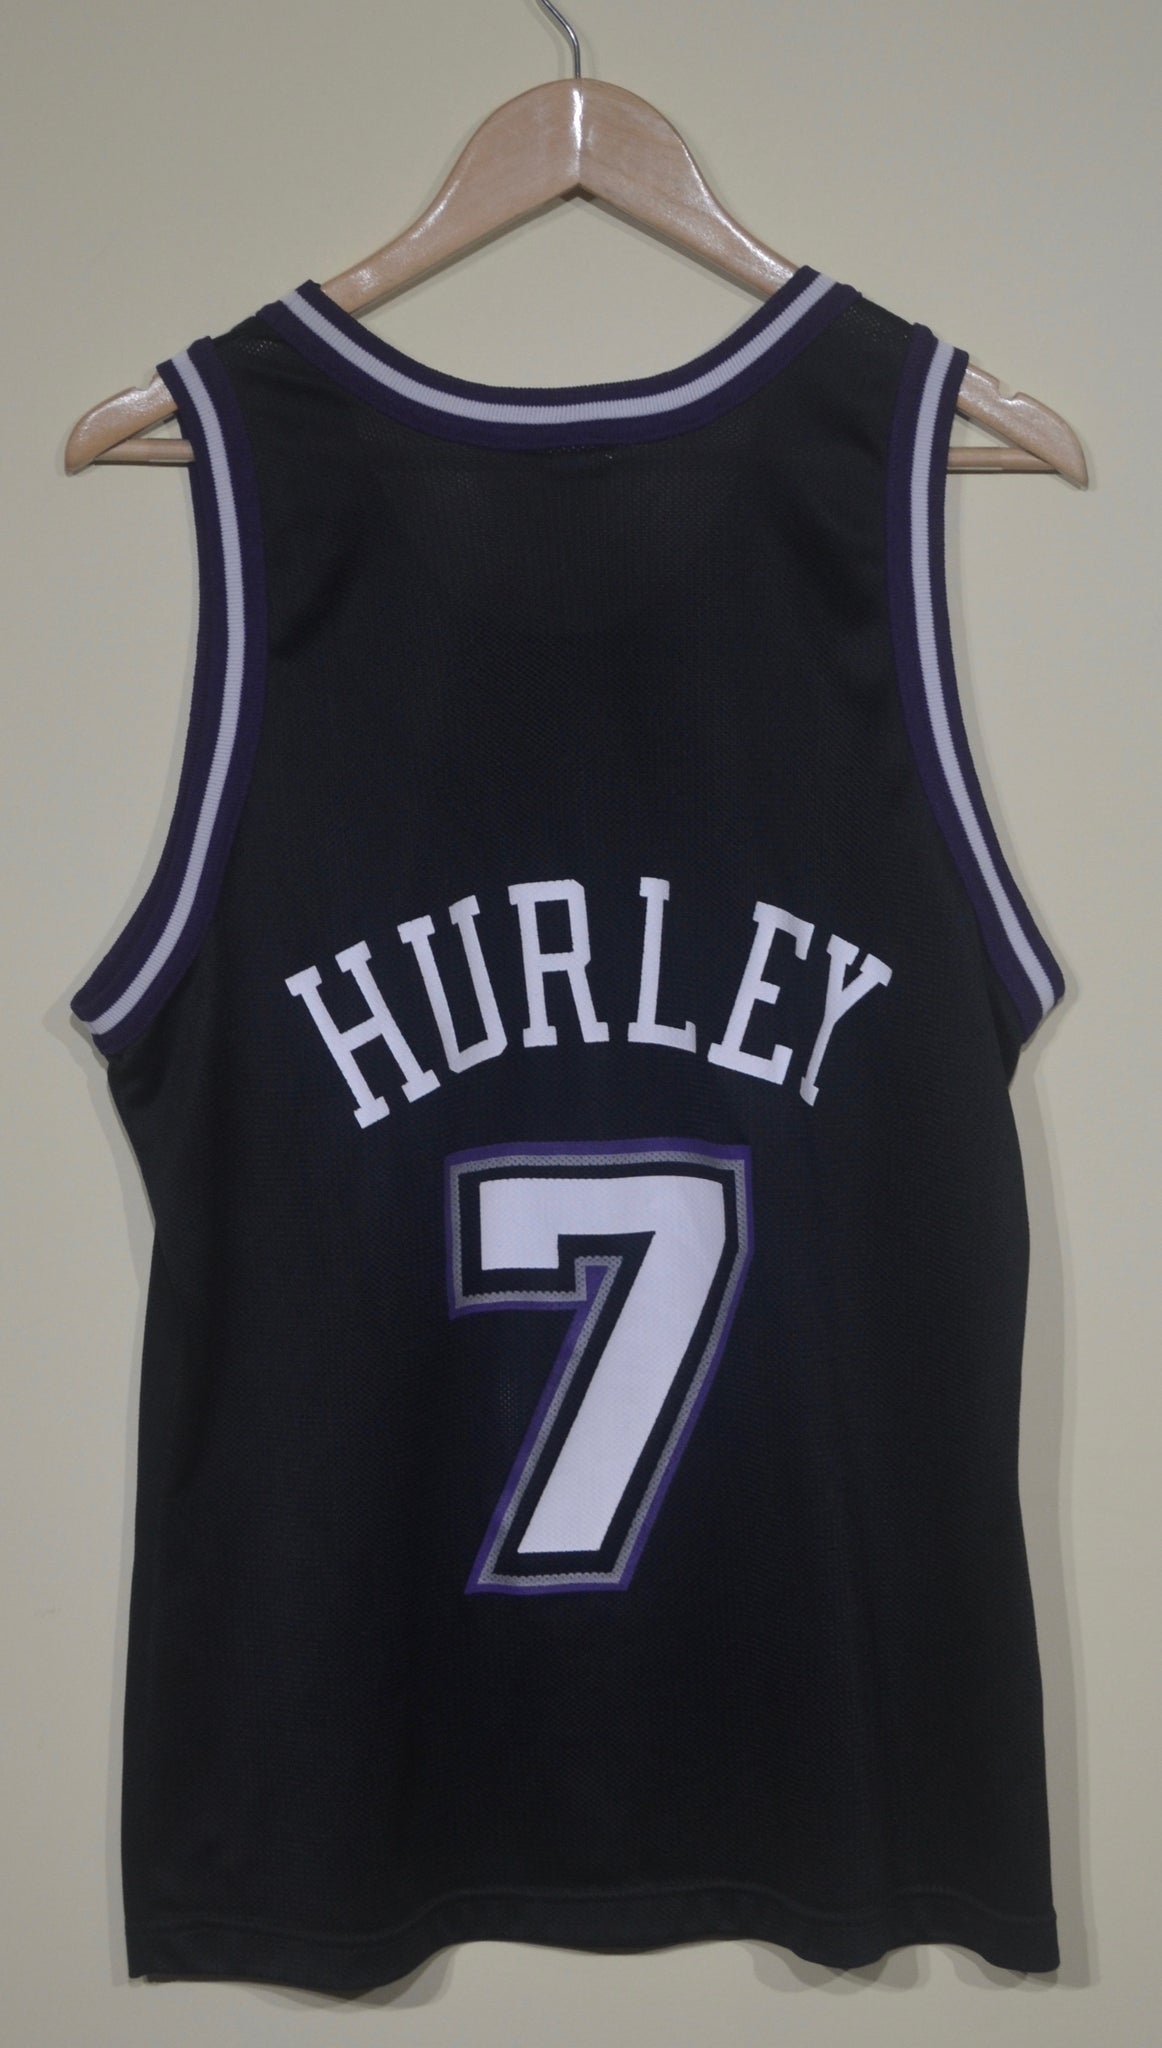 Just over a year ago I met Bobby Hurley (1st Kings jersey I ever had